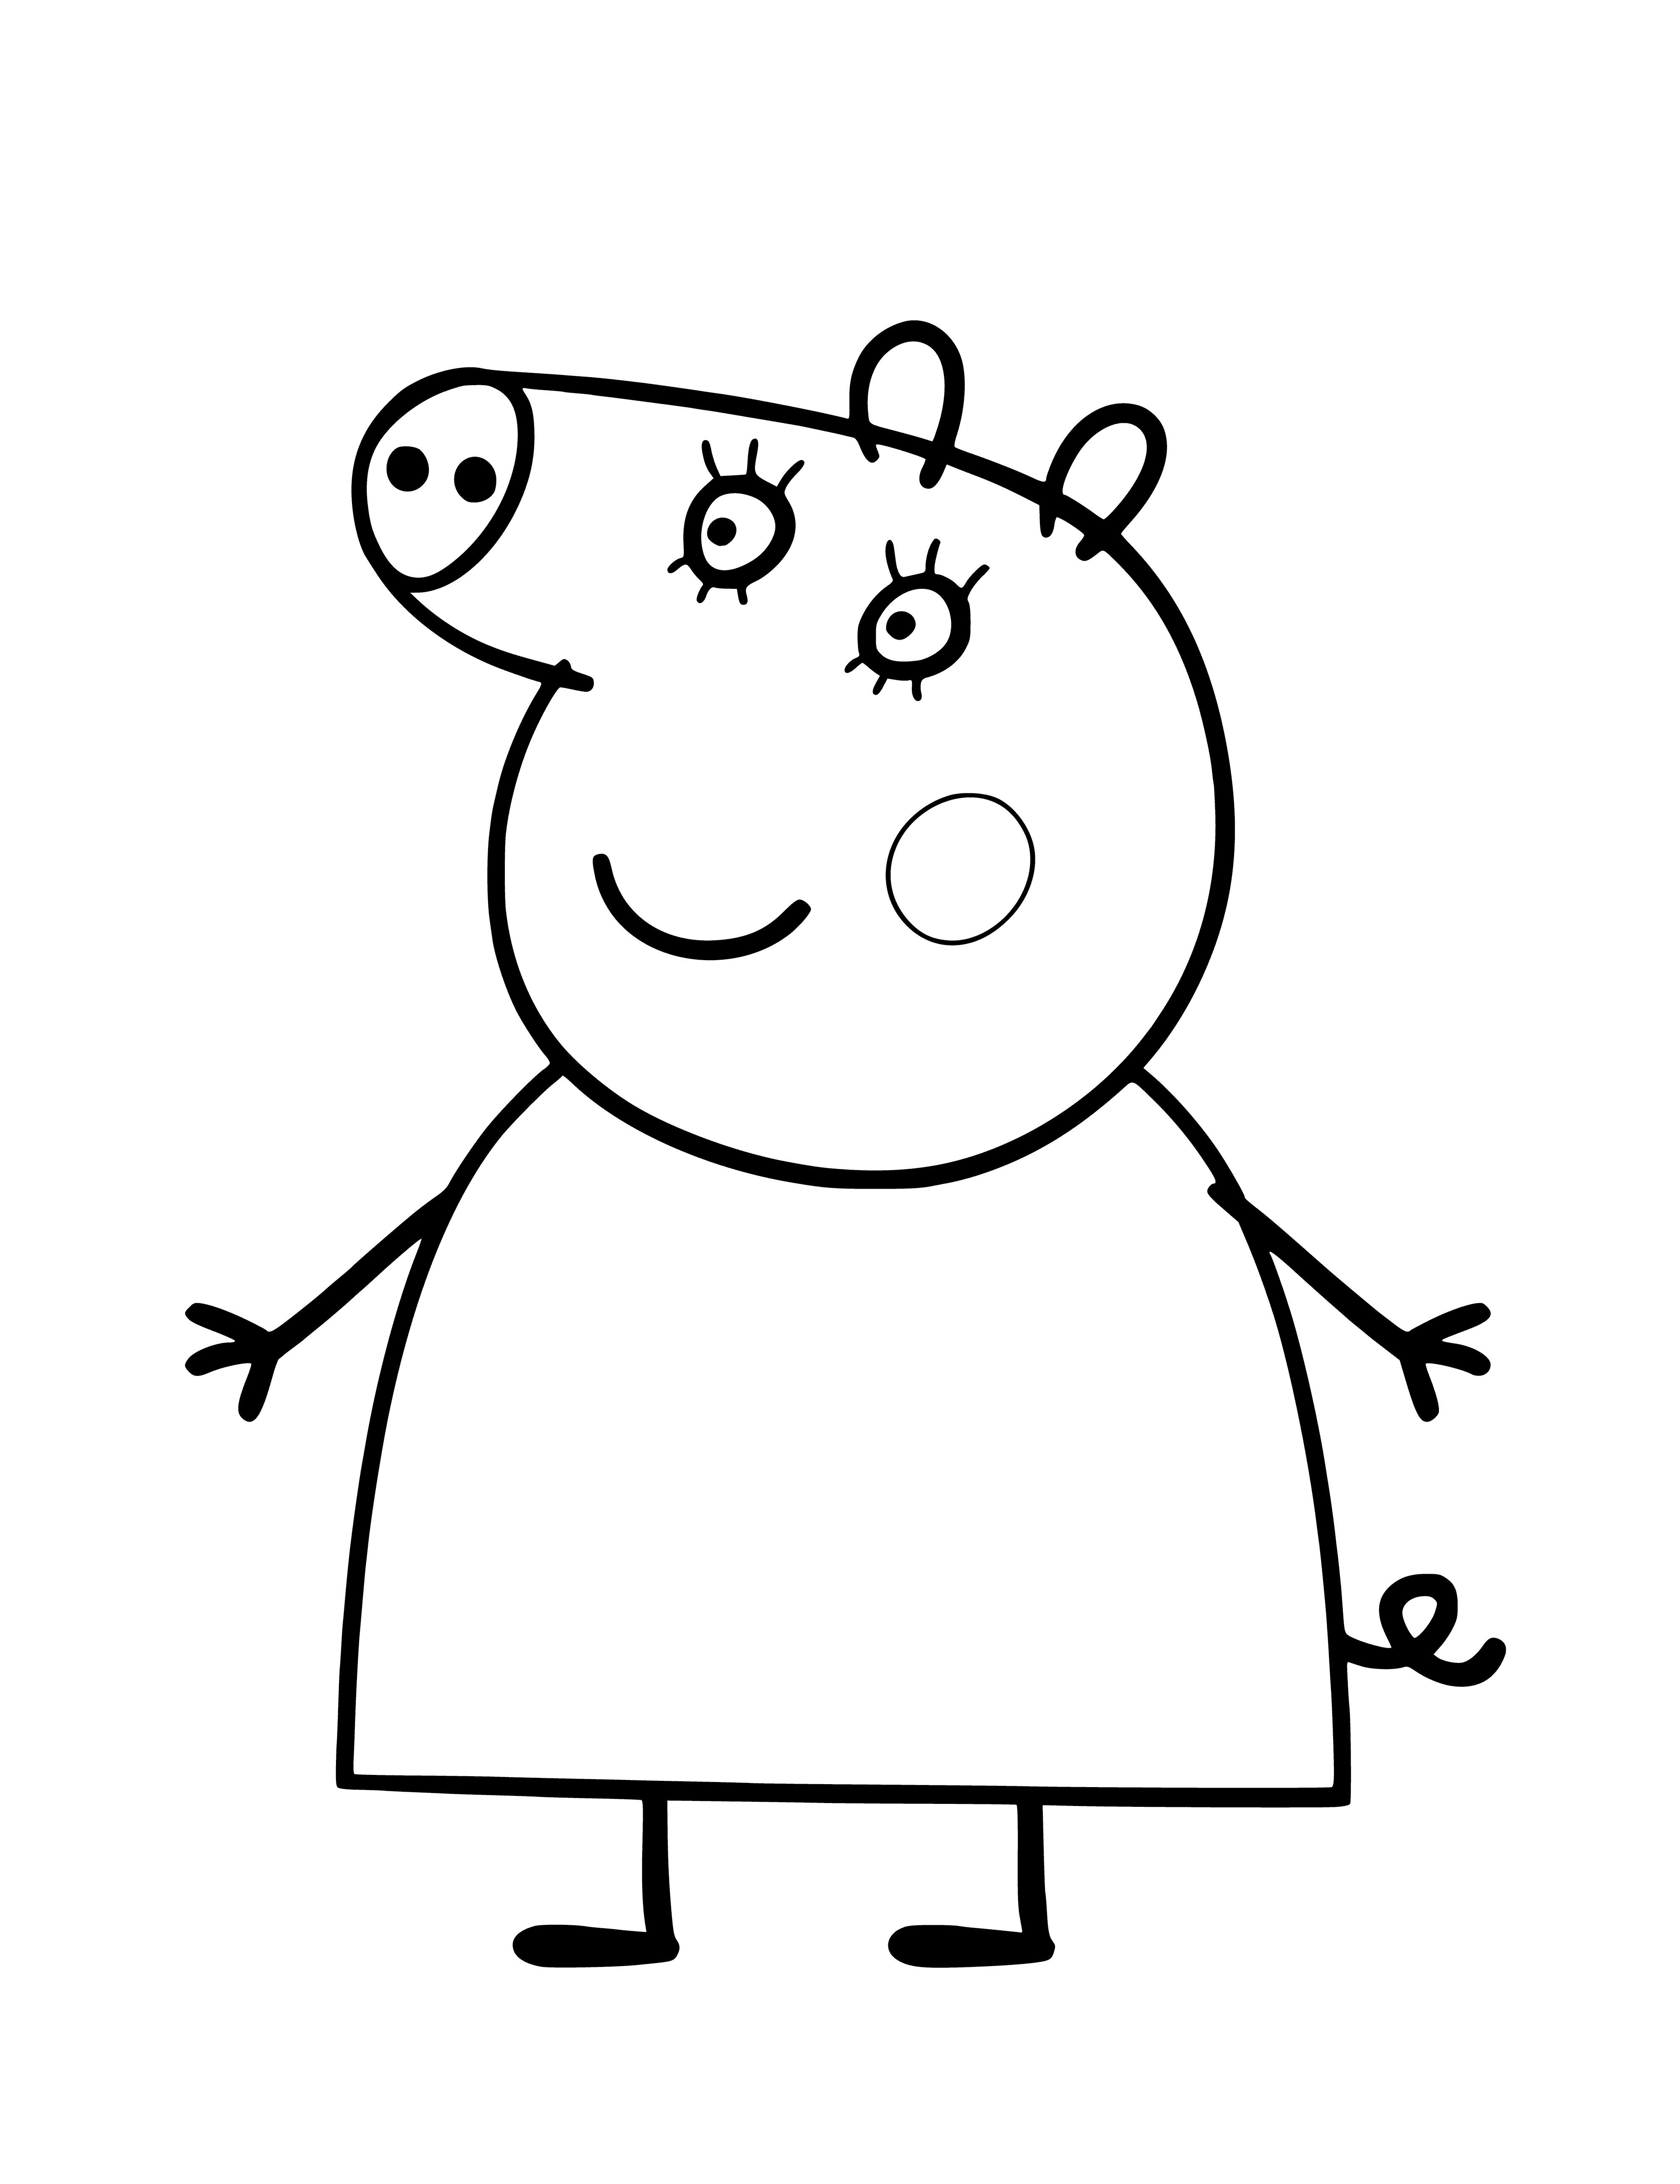 coloring page: Mom Pig is wearing a dress and smiling, standing next to a table with a cake - ready to celebrate!